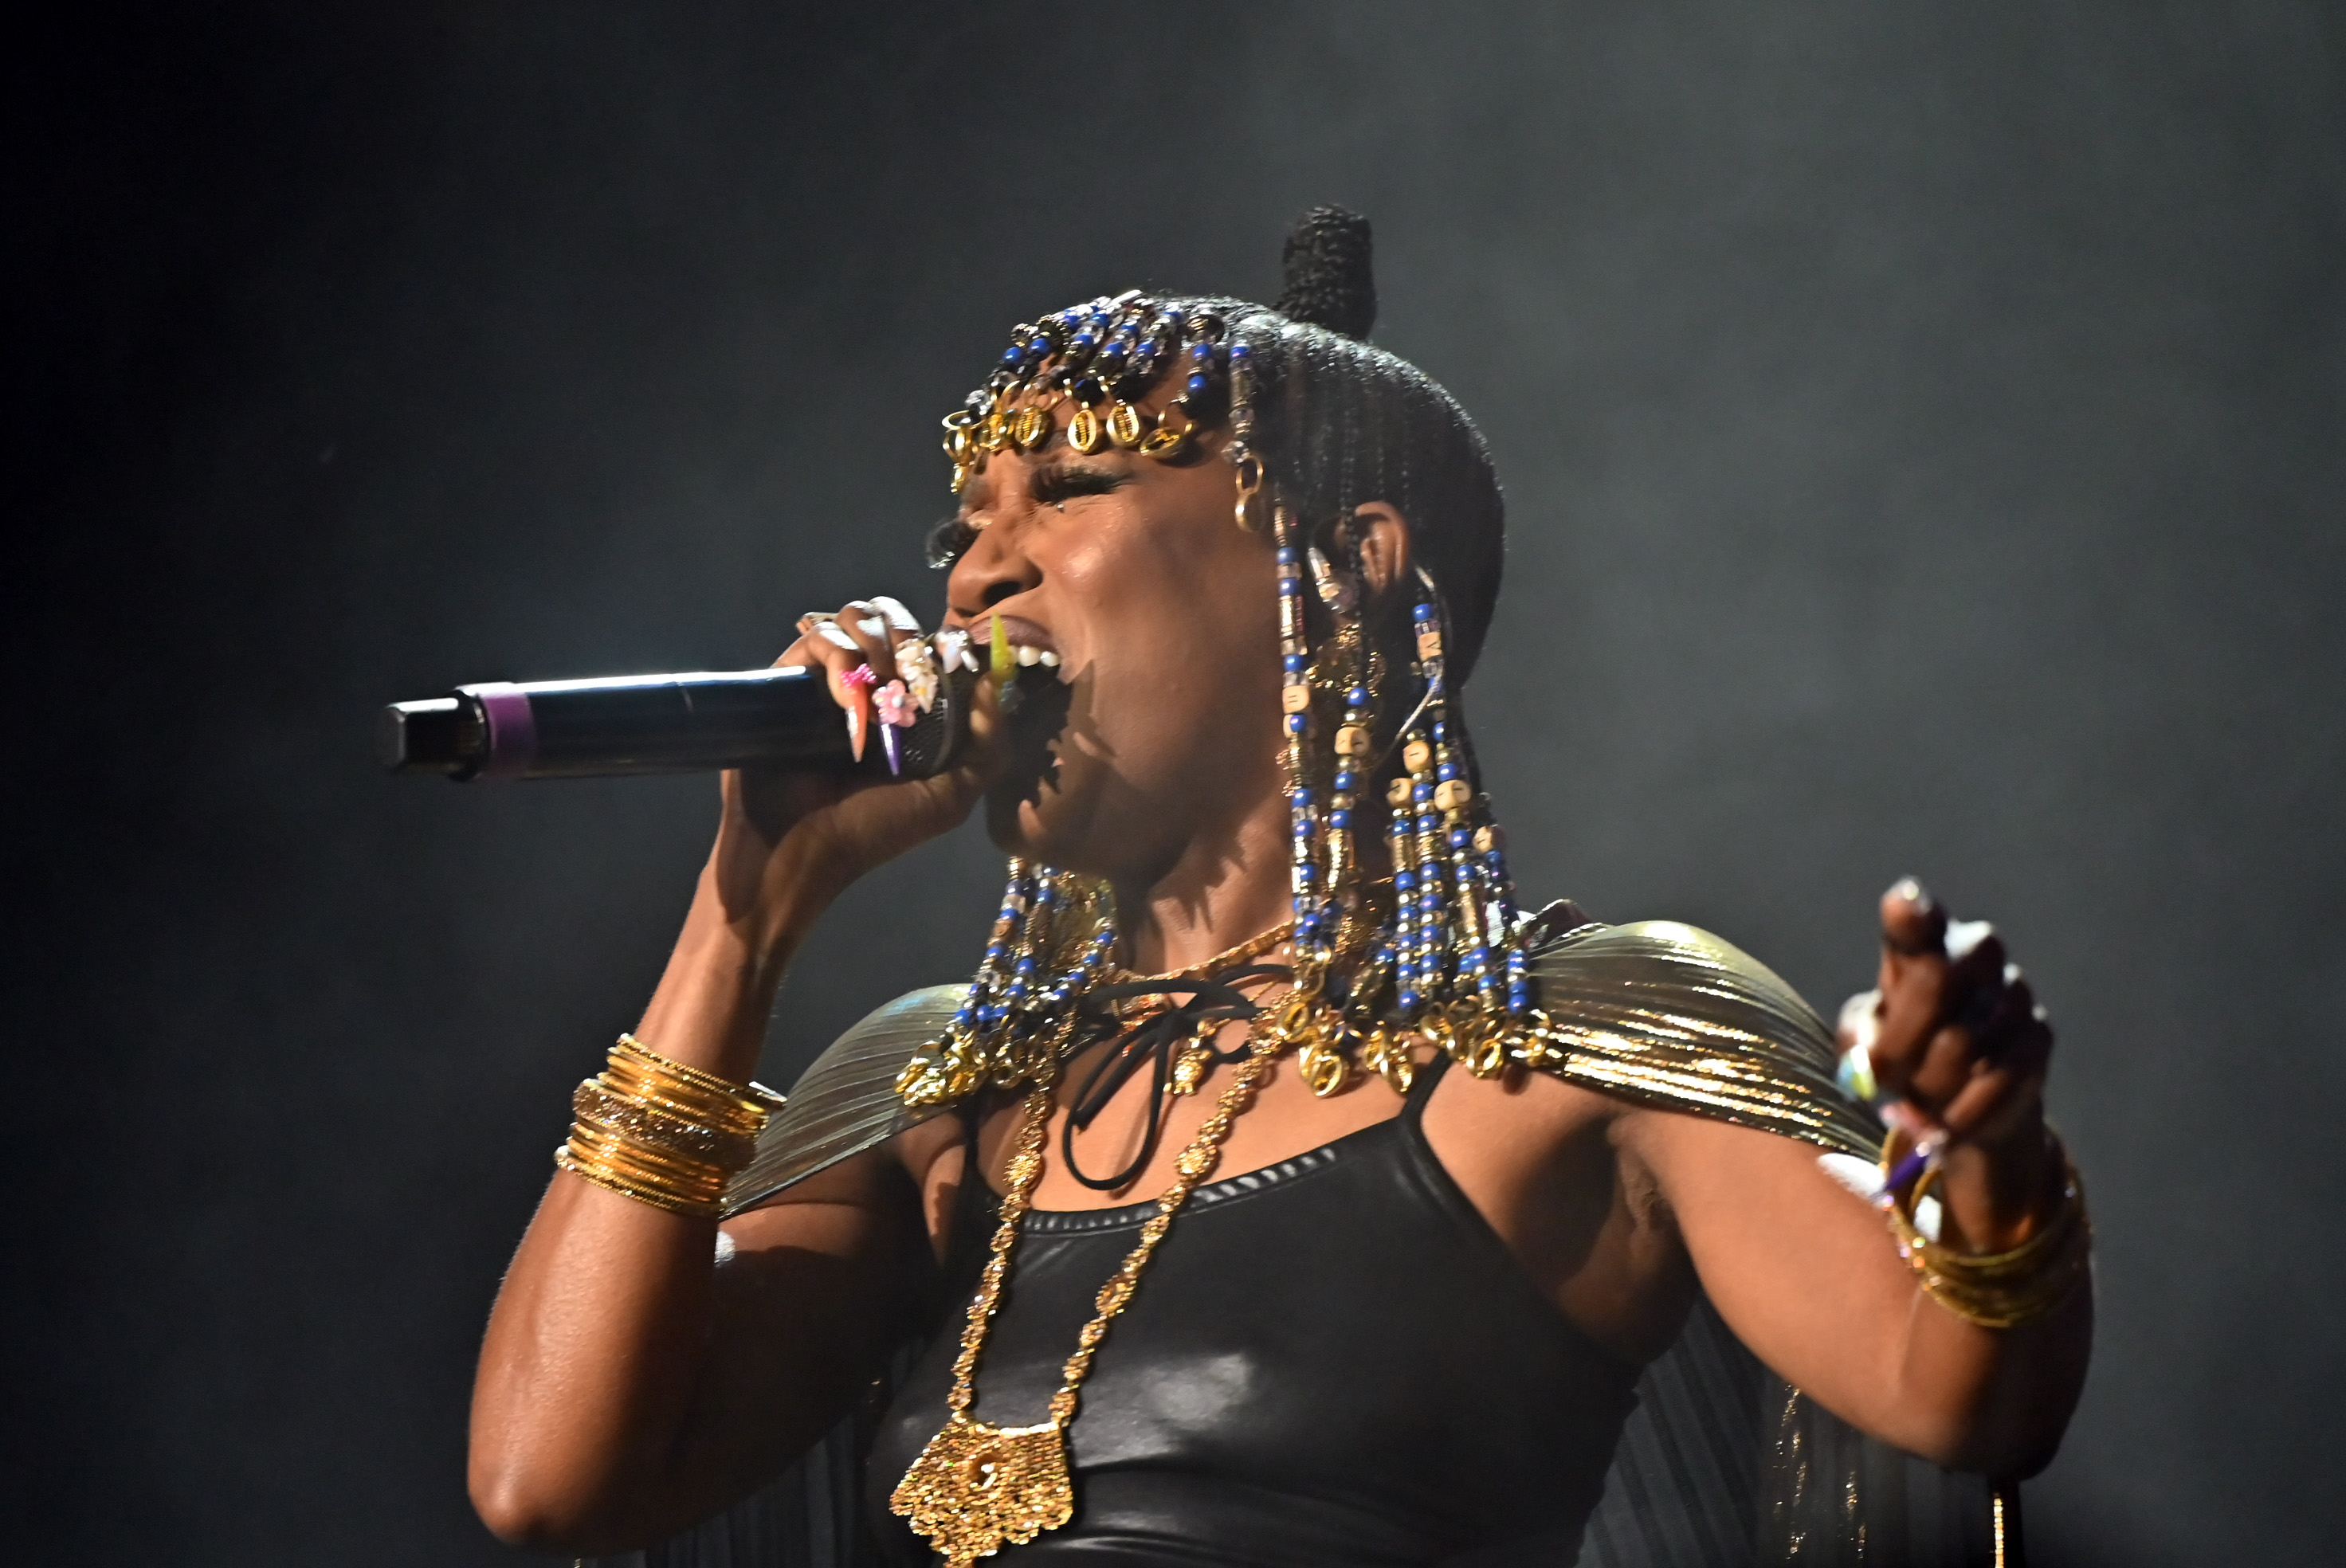 Dionne Farris performs during the Strength Of A Woman Festival & Summit State Farm Arena Concert at State Farm Arena, on May 7, 2022, in Atlanta, Georgia. | Source: Getty Images